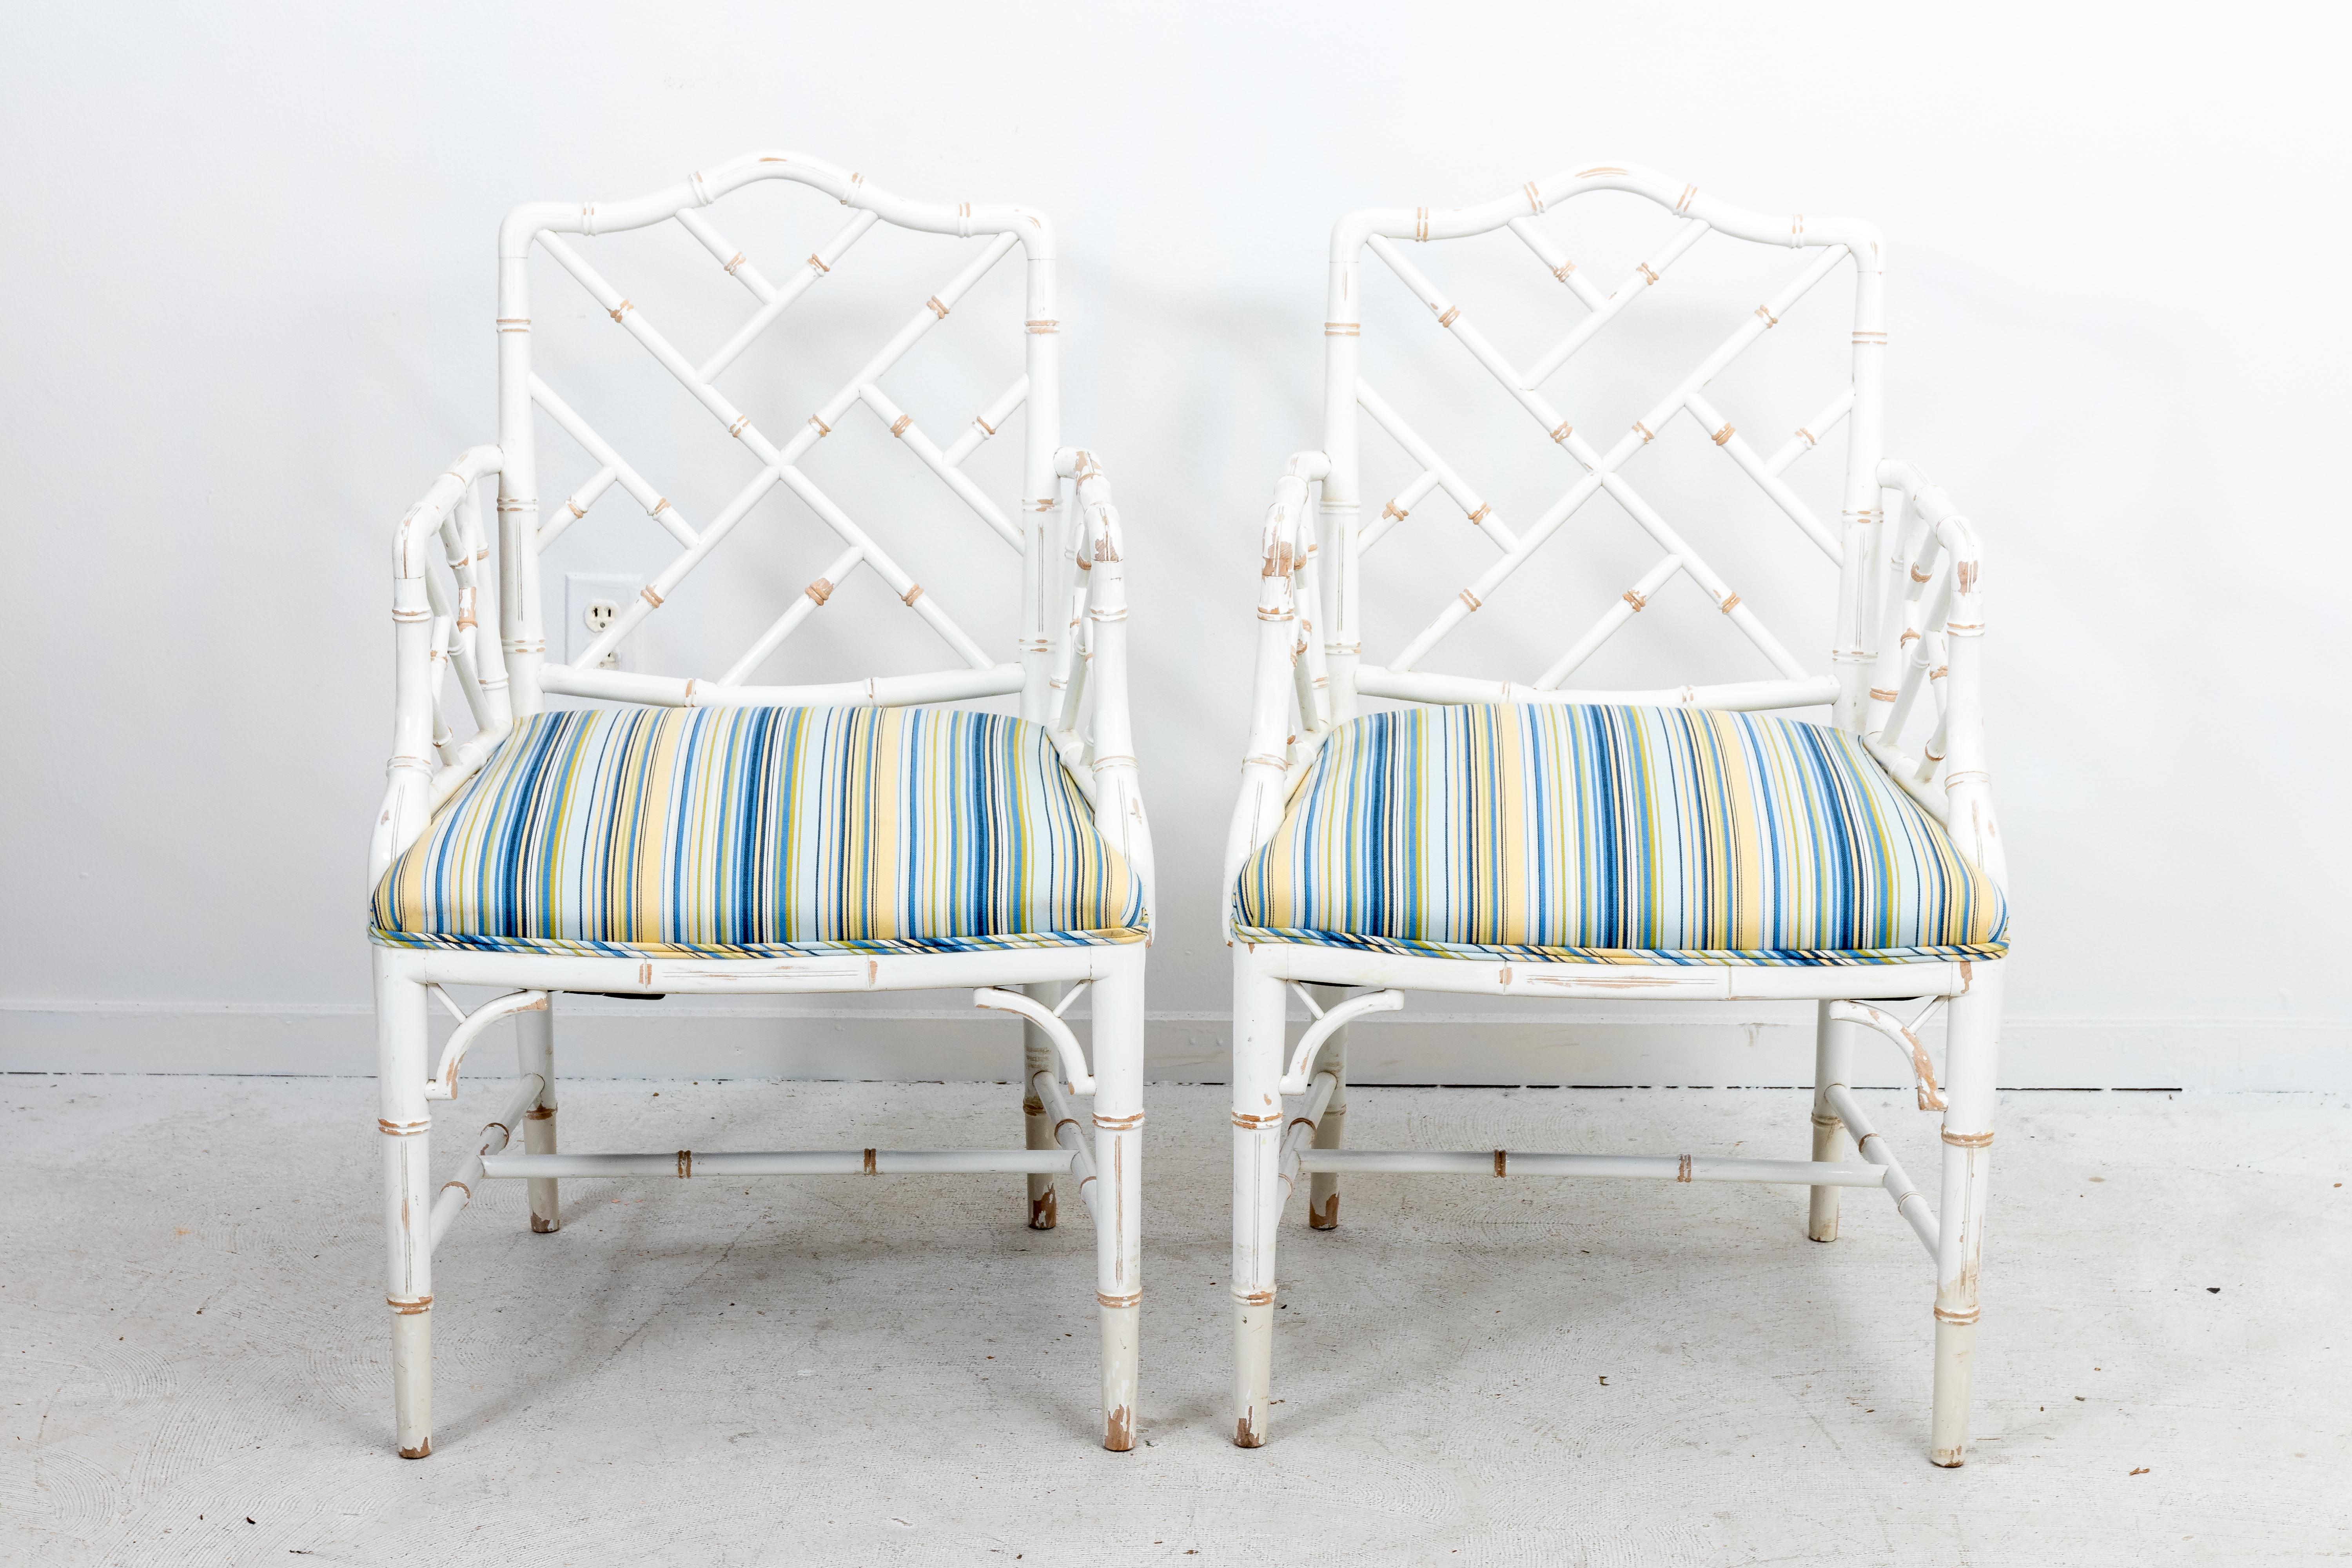 Pair of Painted Chinese Chippendale style distressed finish faux bamboo armchairs. Made by Century Furniture in North Carolina. Clean upholstery. Priced per pair.